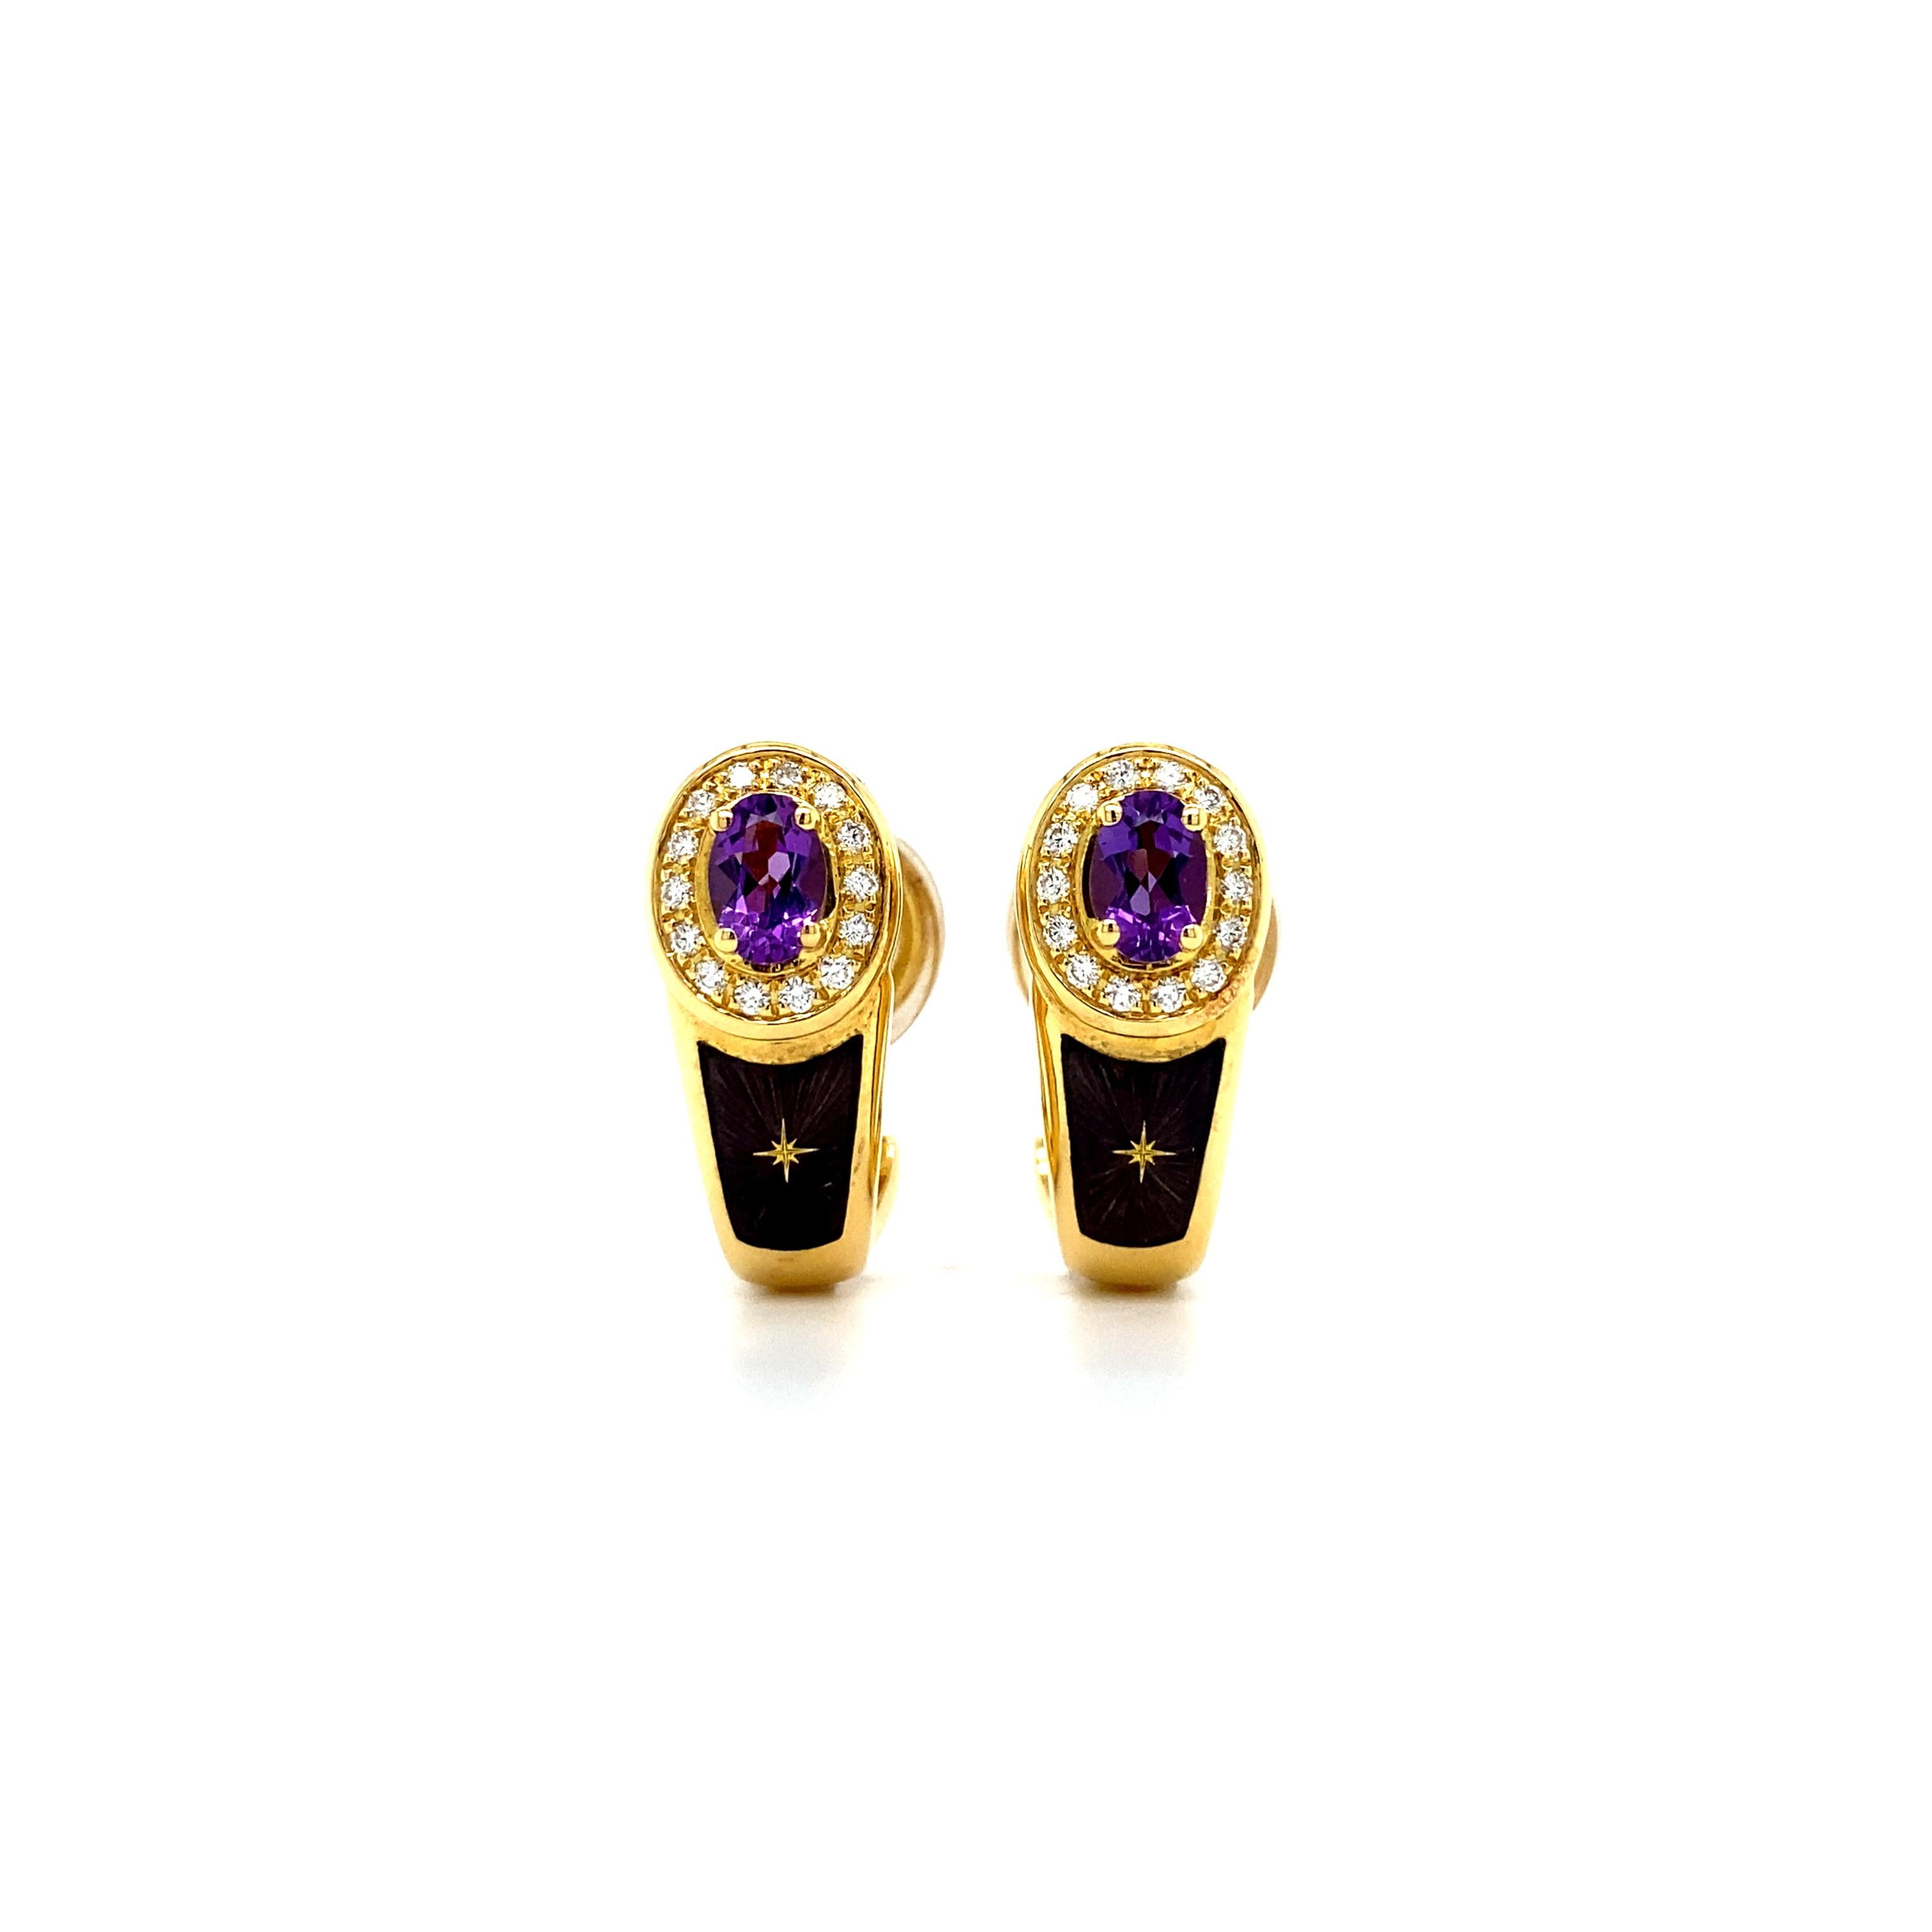 Limited edition Fabergé 18k yellow gold purple enamel earrings, amethyst, 28 diamonds total 0,280 ct G/IF, limited edition, No. 47 of 1000, with certificate of authenticity. 

For two decades (1989 to 2009) the renowned German jewellery firm VICTOR